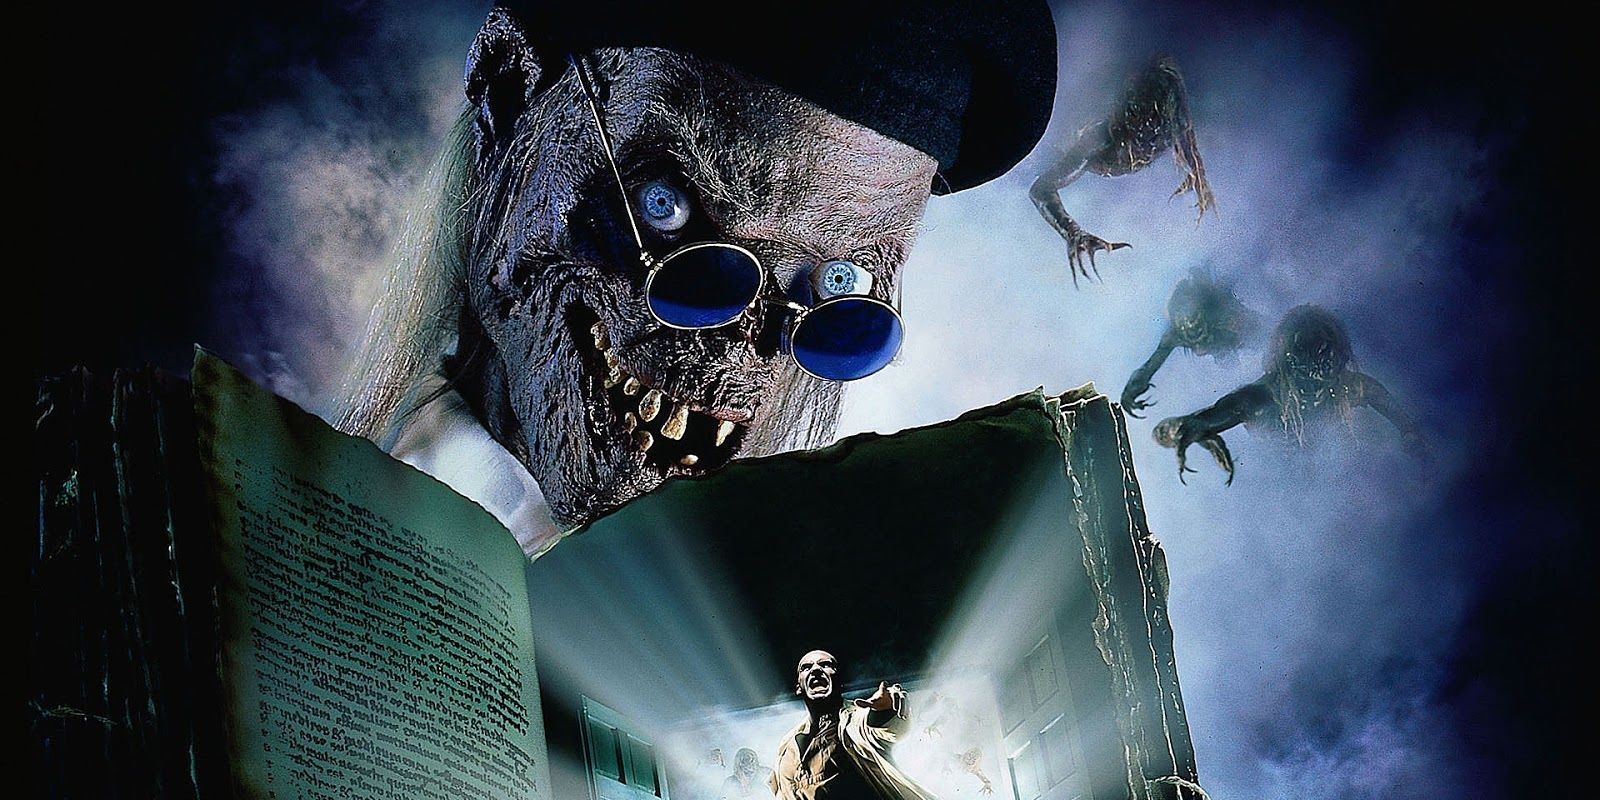 Tales from the Crypt: Demon Knight poster art shows the Crypt Keeper and demons.